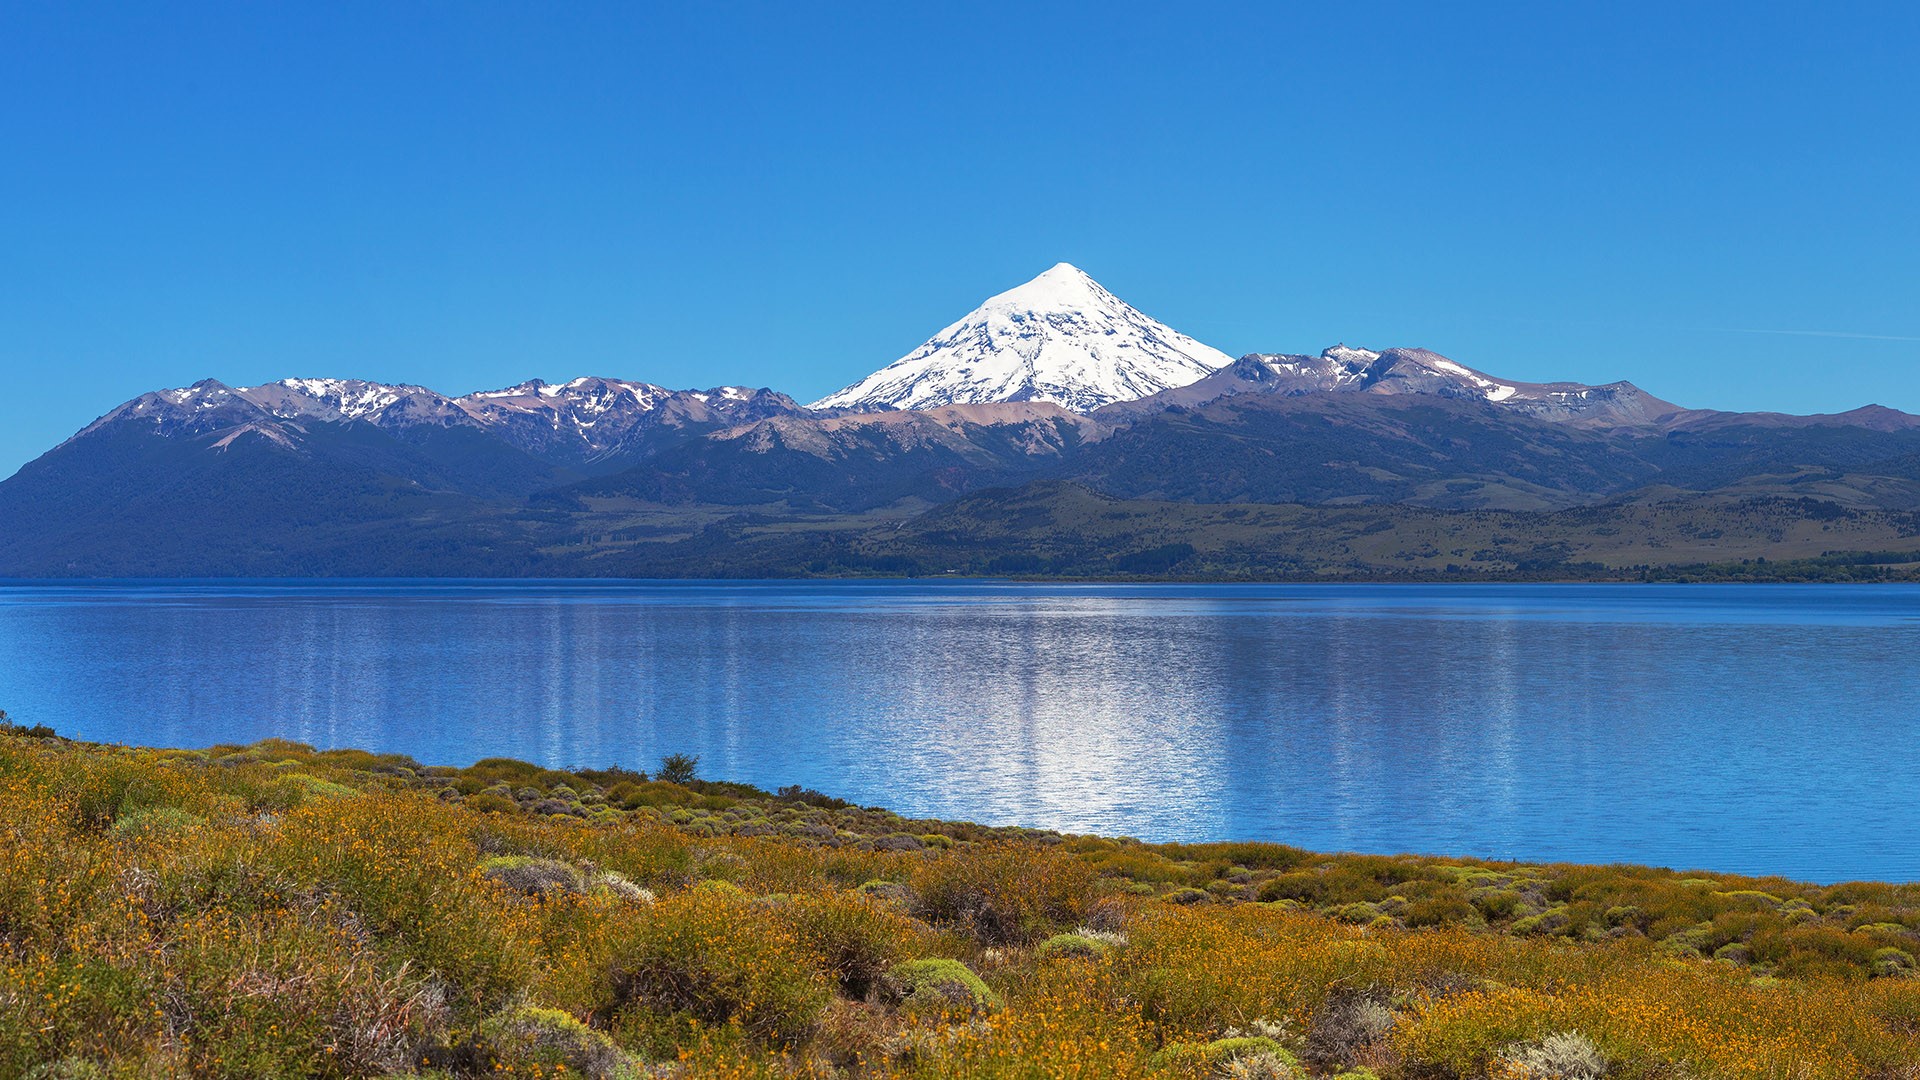 General 1920x1080 mountains river plants nature landscape water snowy peak clear sky far view Patagonia Argentina